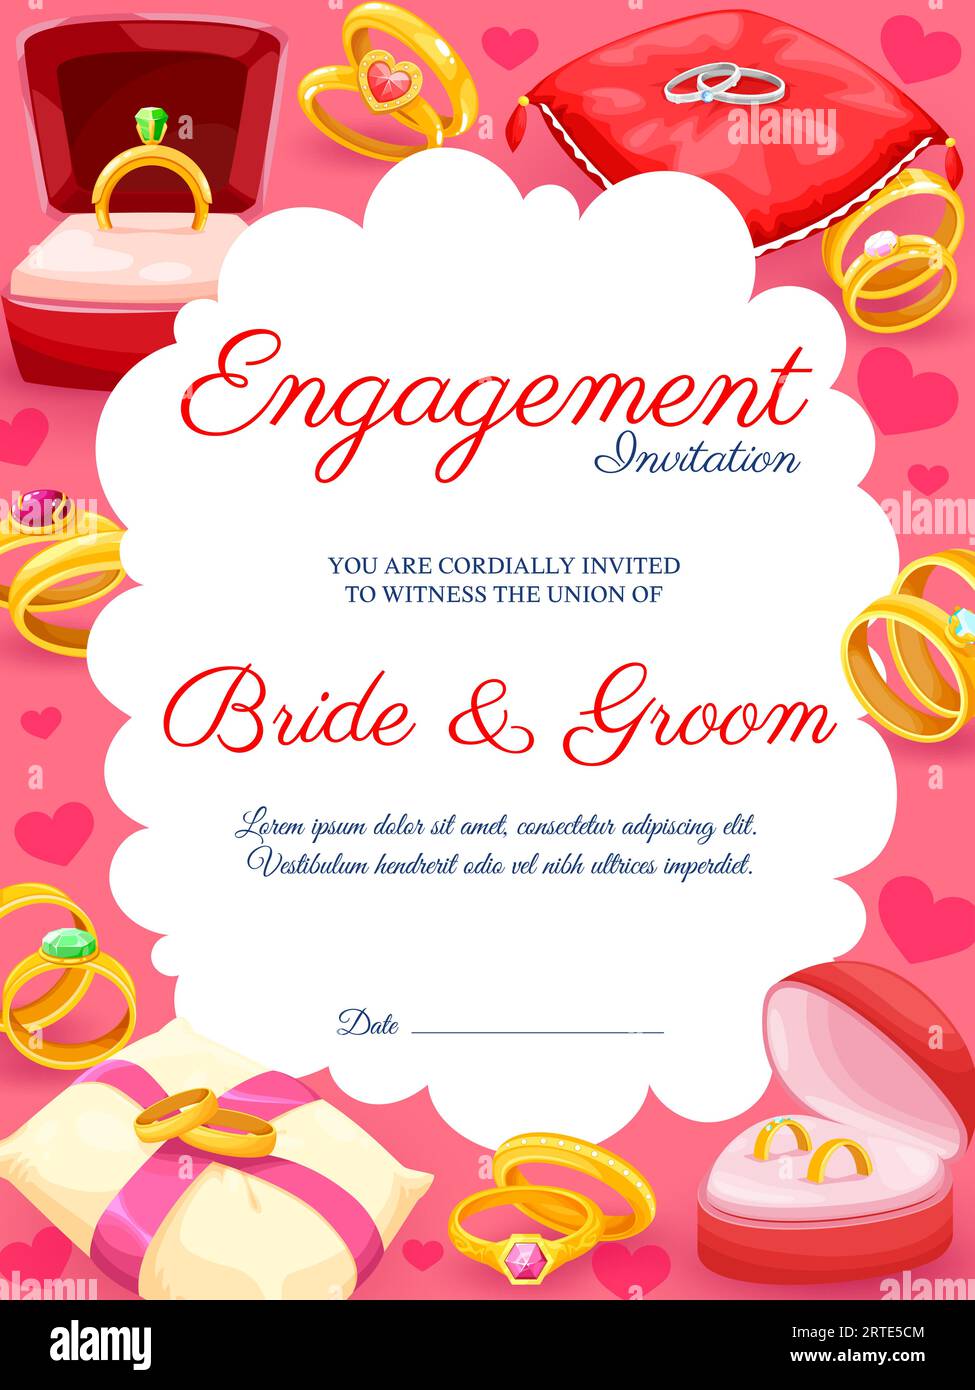 Free Engagement Invitation Cards: Adding a Personal Touch by Crafty Art on  Dribbble